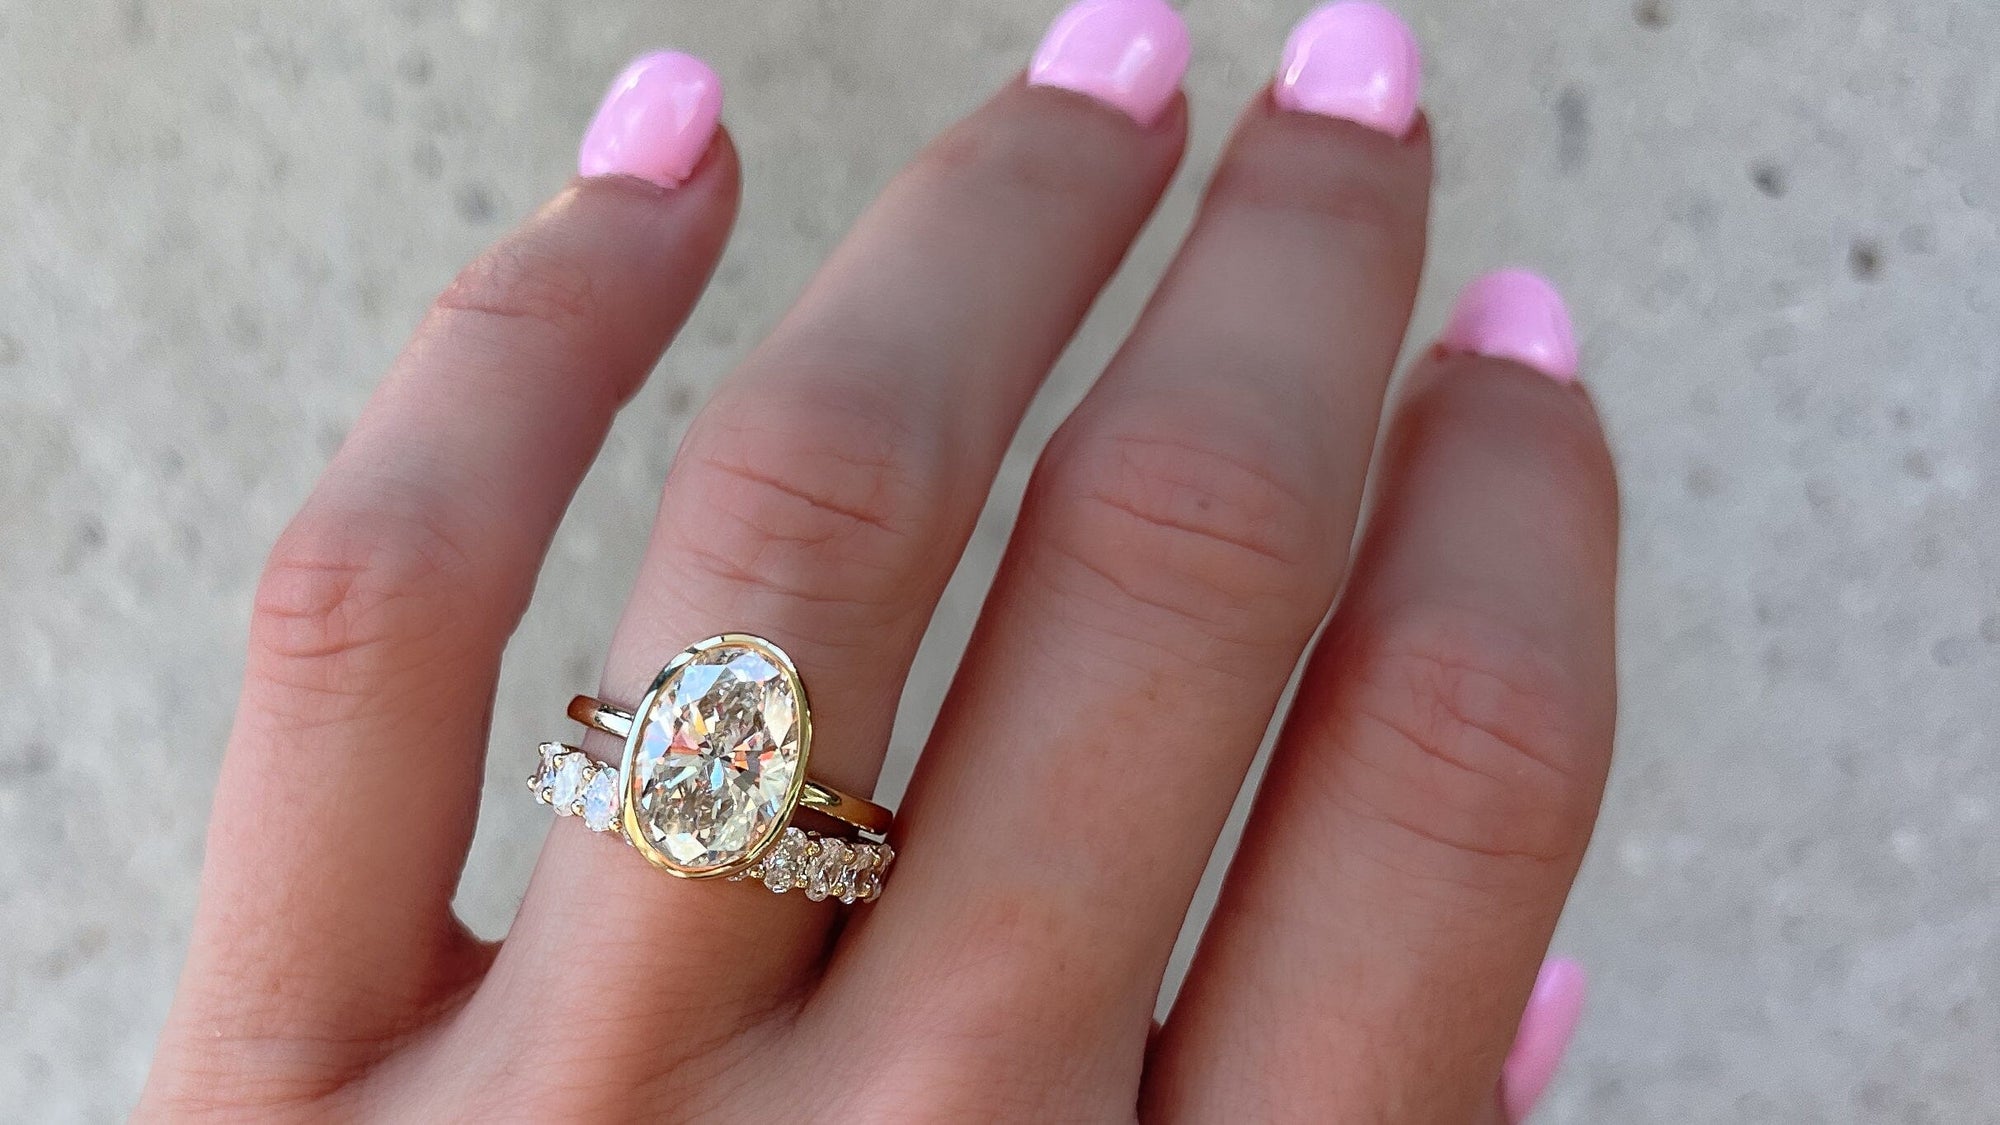 Engagement ring: Who gets to keep it if the wedding is called off?